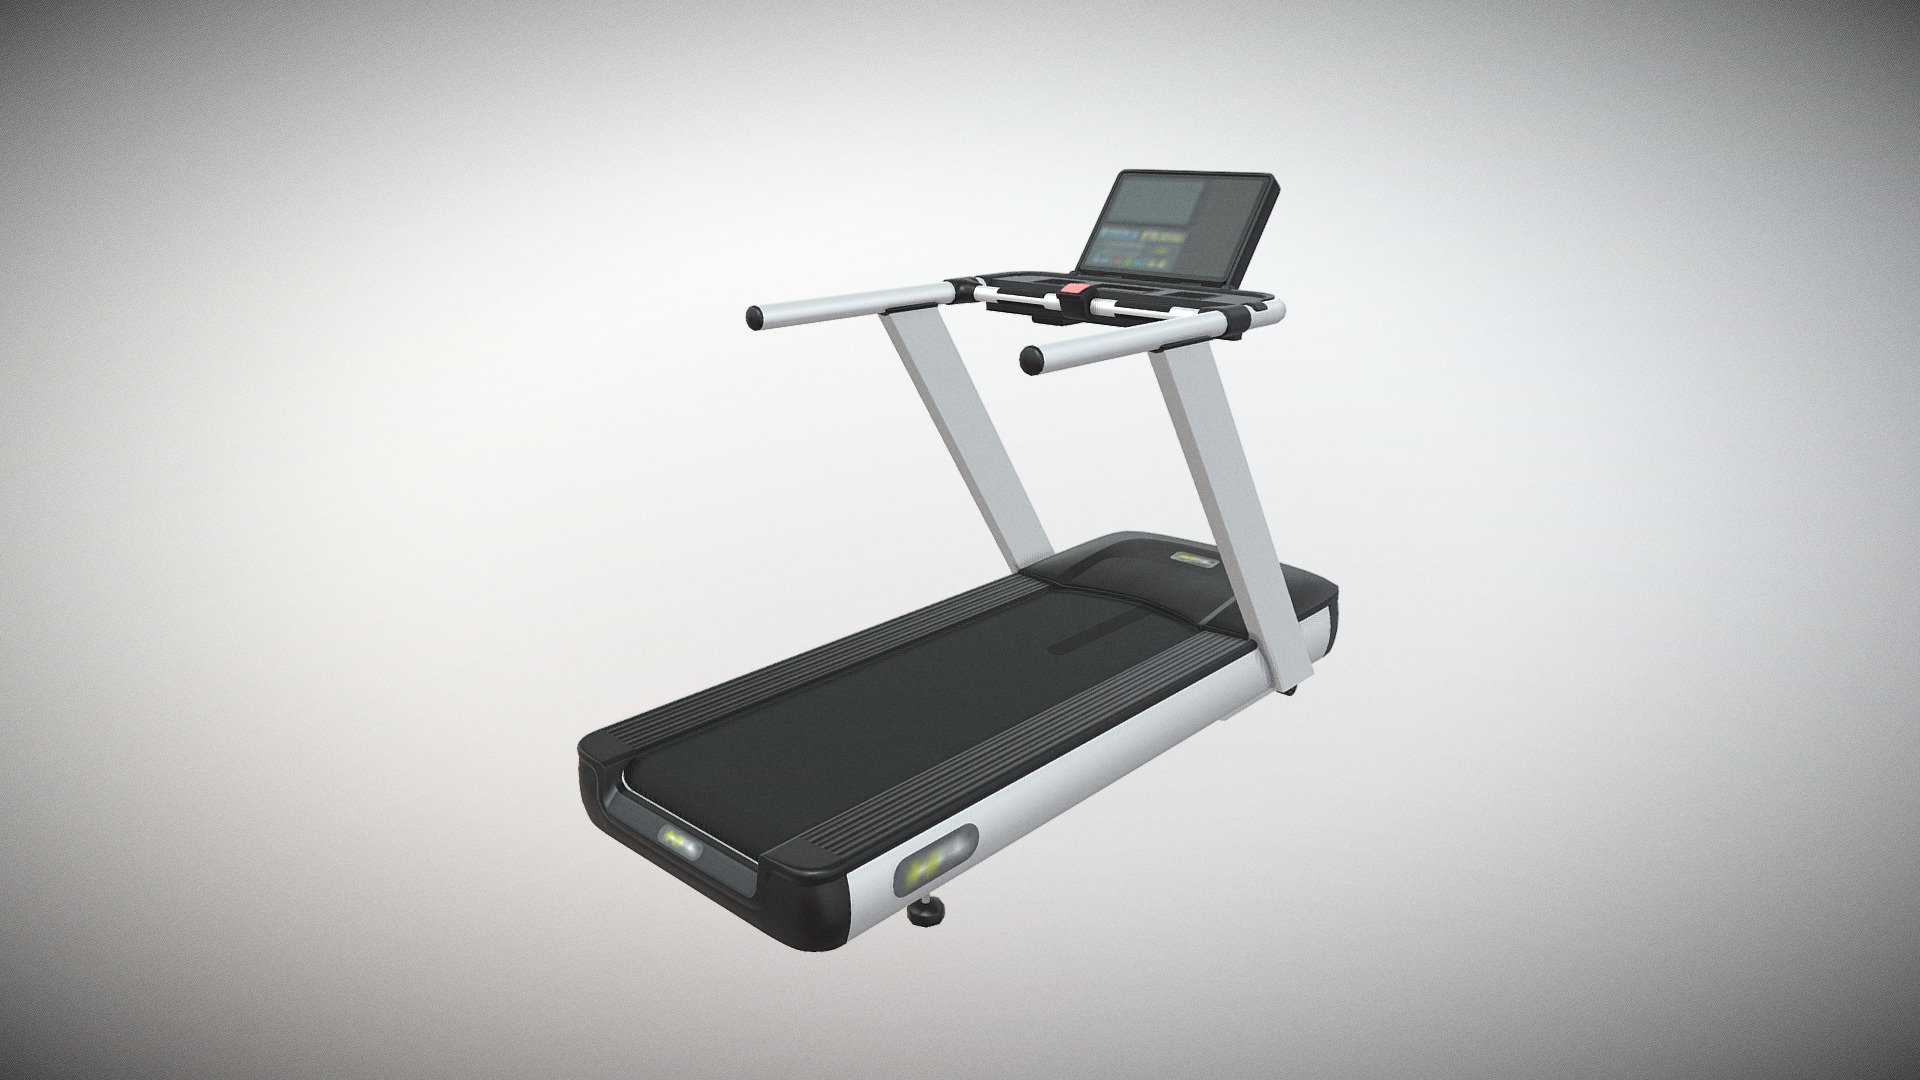 Reasonably priced proven treadmill, LED panel with simple, intuitive user interface. Speed up to 20km / h and incline up to 15%, both of which can also be conveniently set via preselection function as 3, 6, 9, 12, 15 (km / h or °). Several preprogrammed training programs available. Reversible deck. The engine has a nominal power of 2.2KW. The device is equipped with a maintenance-free carpet from German production and a Mitsubishi converter.

http://dhz-fitness.de/en/cardio-equipment#X8600 - DHZ TREADMILL - 3D model by supersport-fitness 3d model